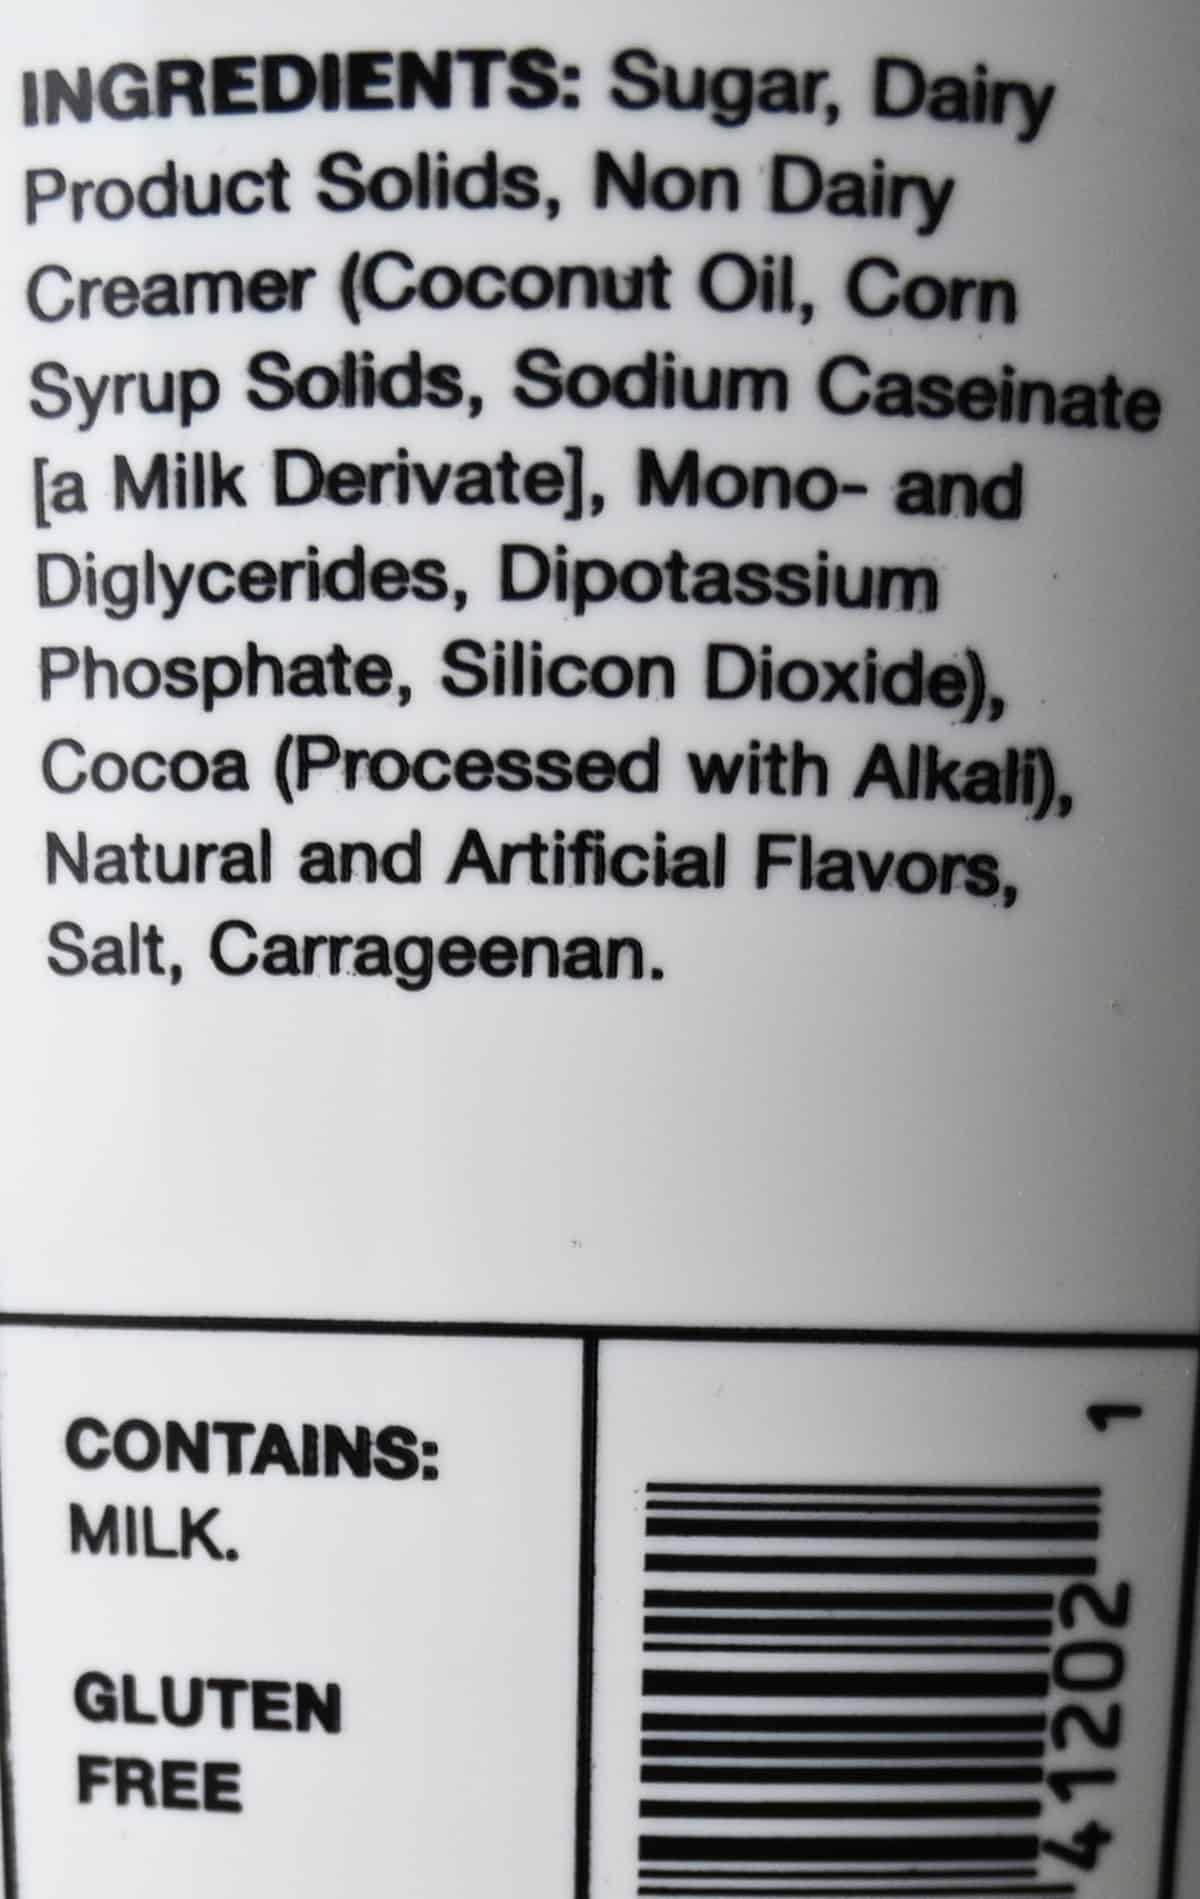 Image of the milk chocolate hot cocoa ingredients from the back of the container.